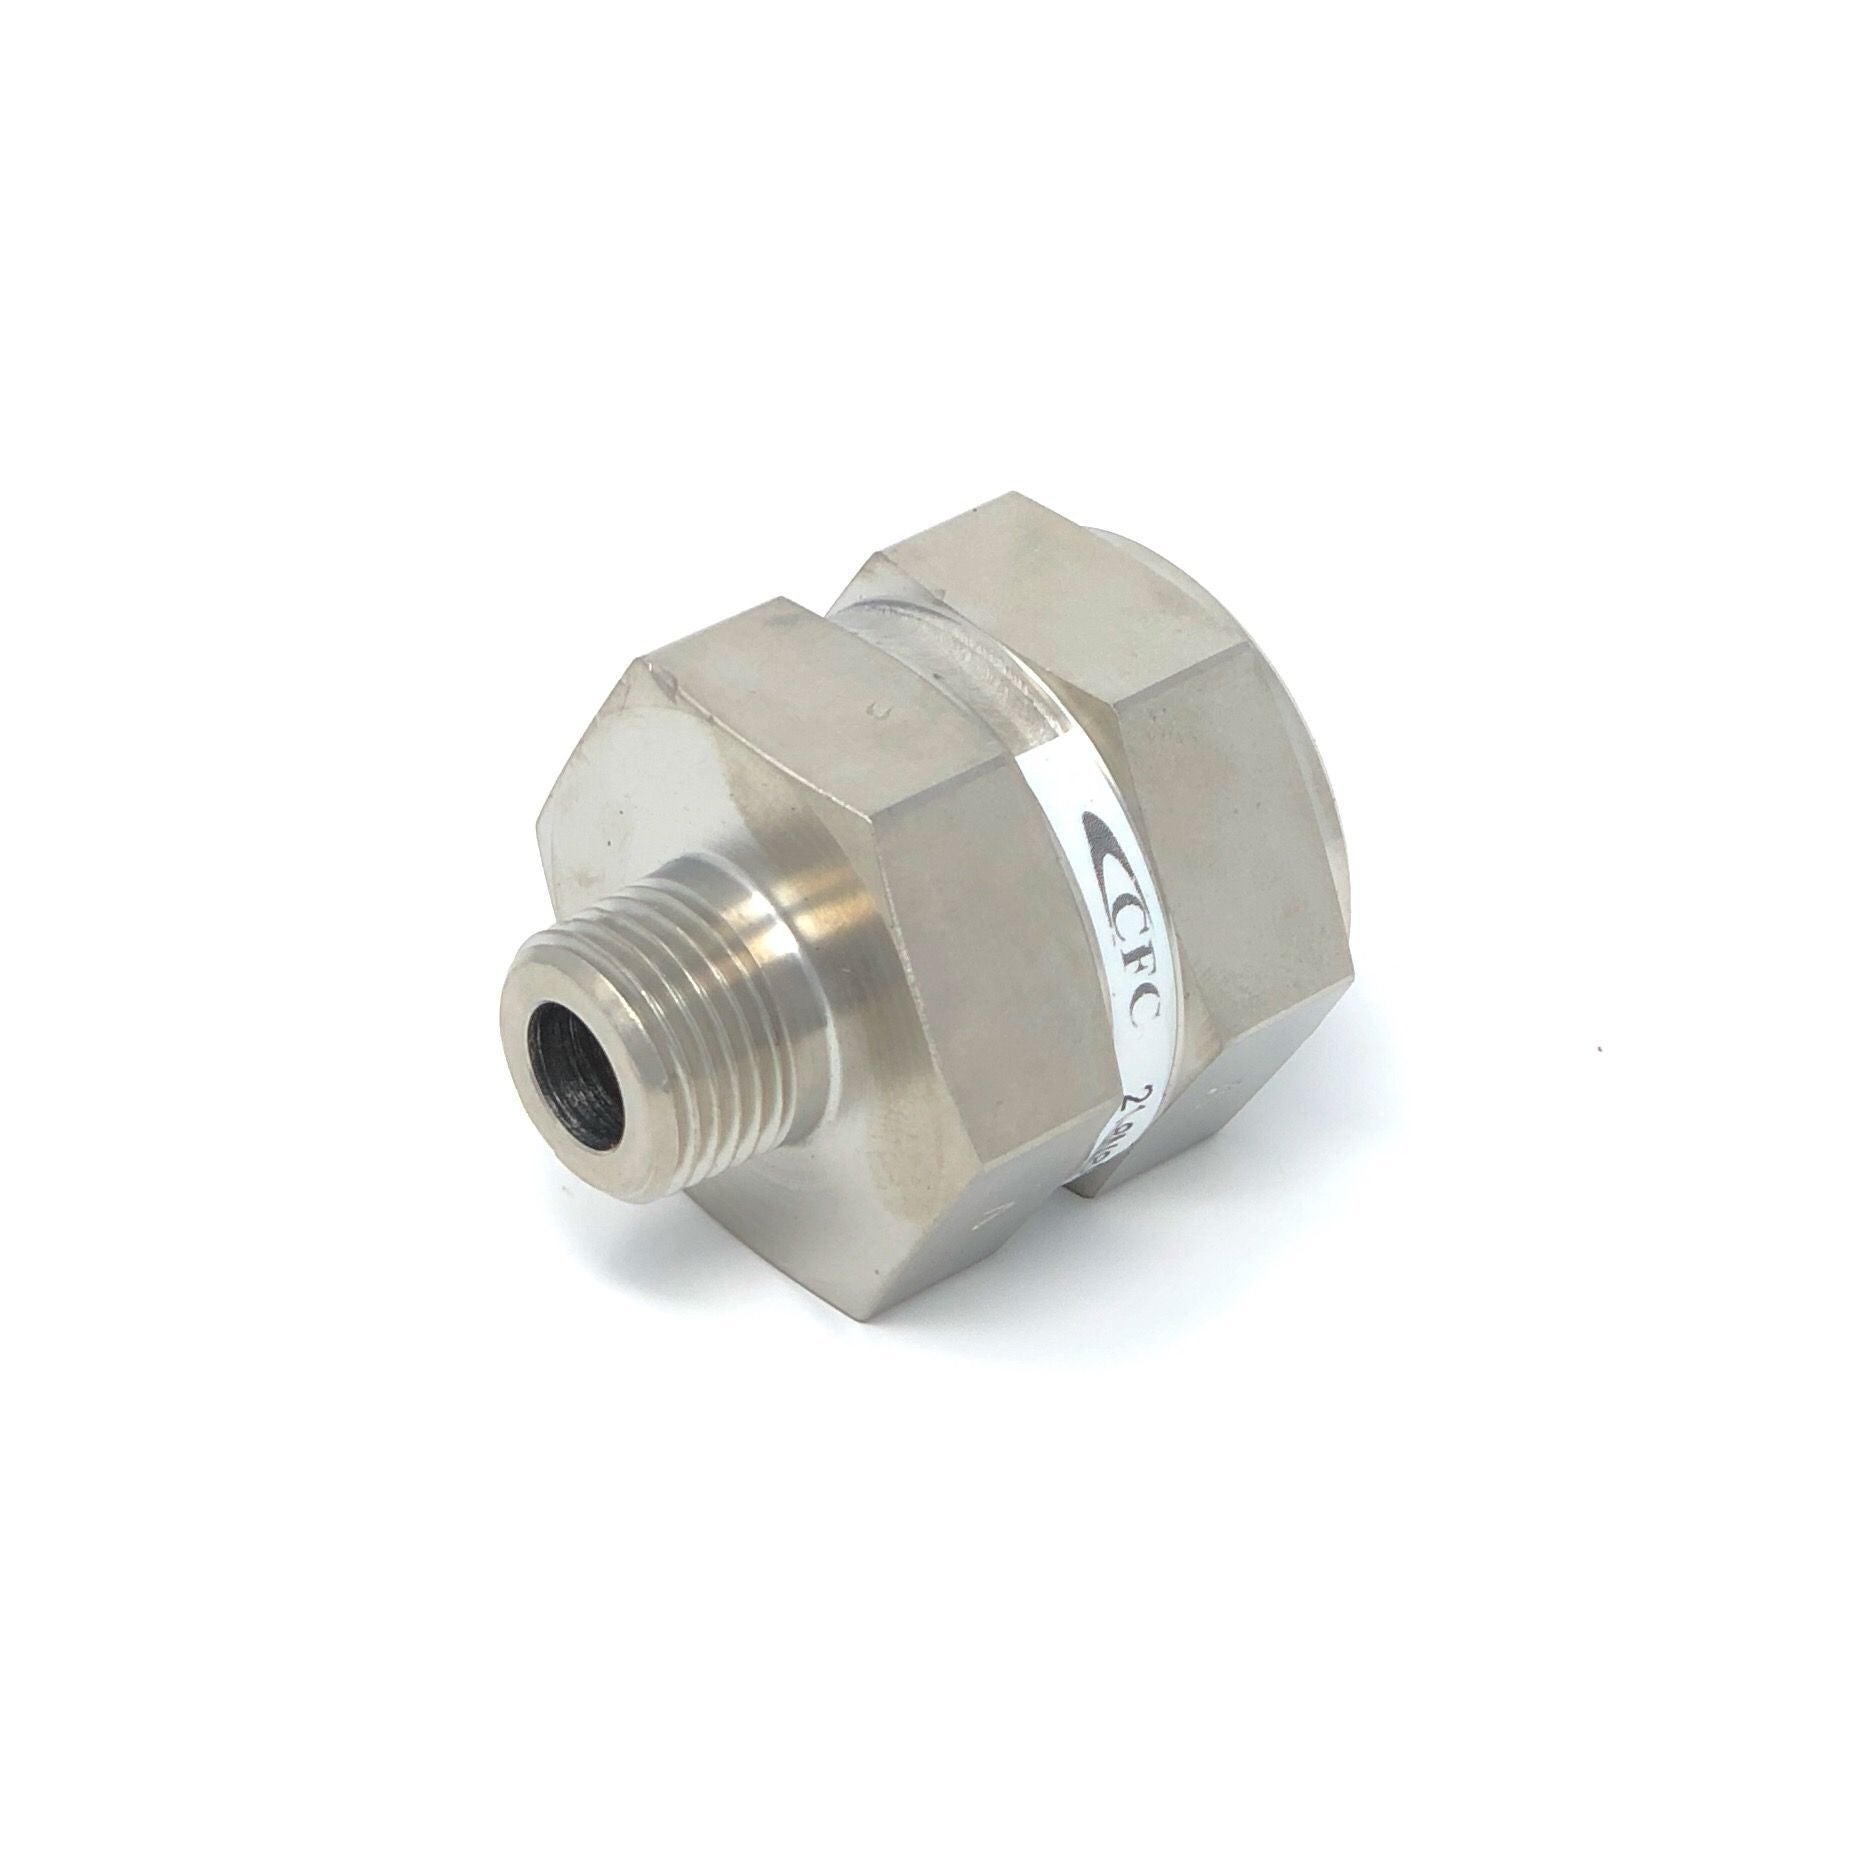 21-6M6M-10S : Chase High Pressure Inline Filter, 6000psi, #6 SAE (3/8"), 10 Micron, No Visual Indicator, No Bypass